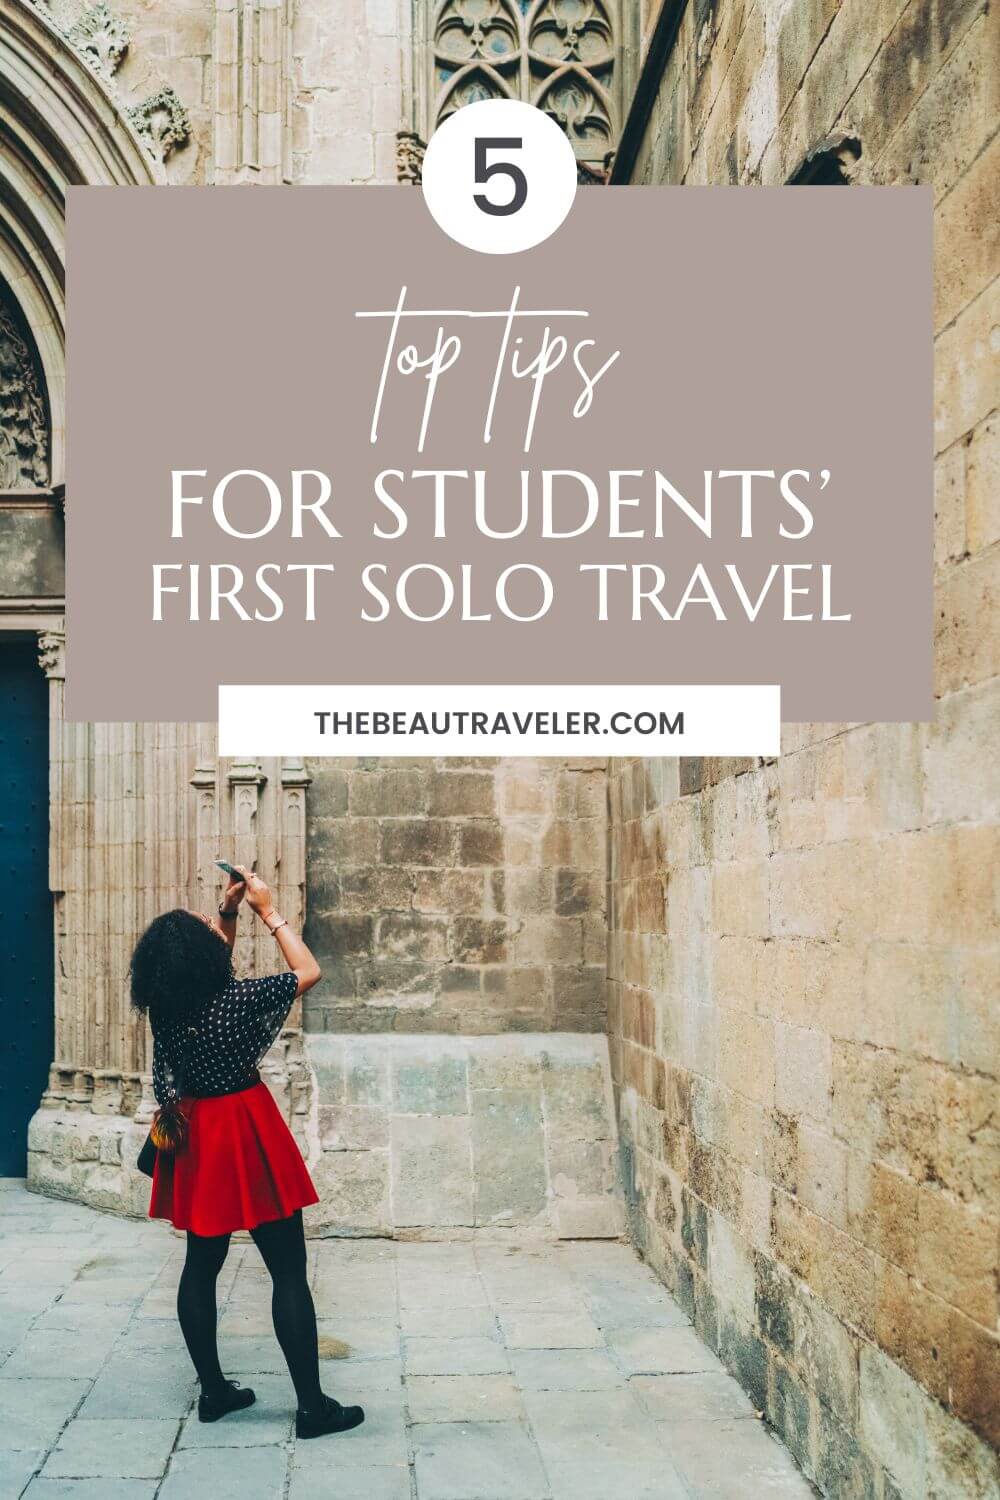 How to Embark on Your Solo Adventure: Top Tips for Students' First Solo Travel - The BeauTraveler